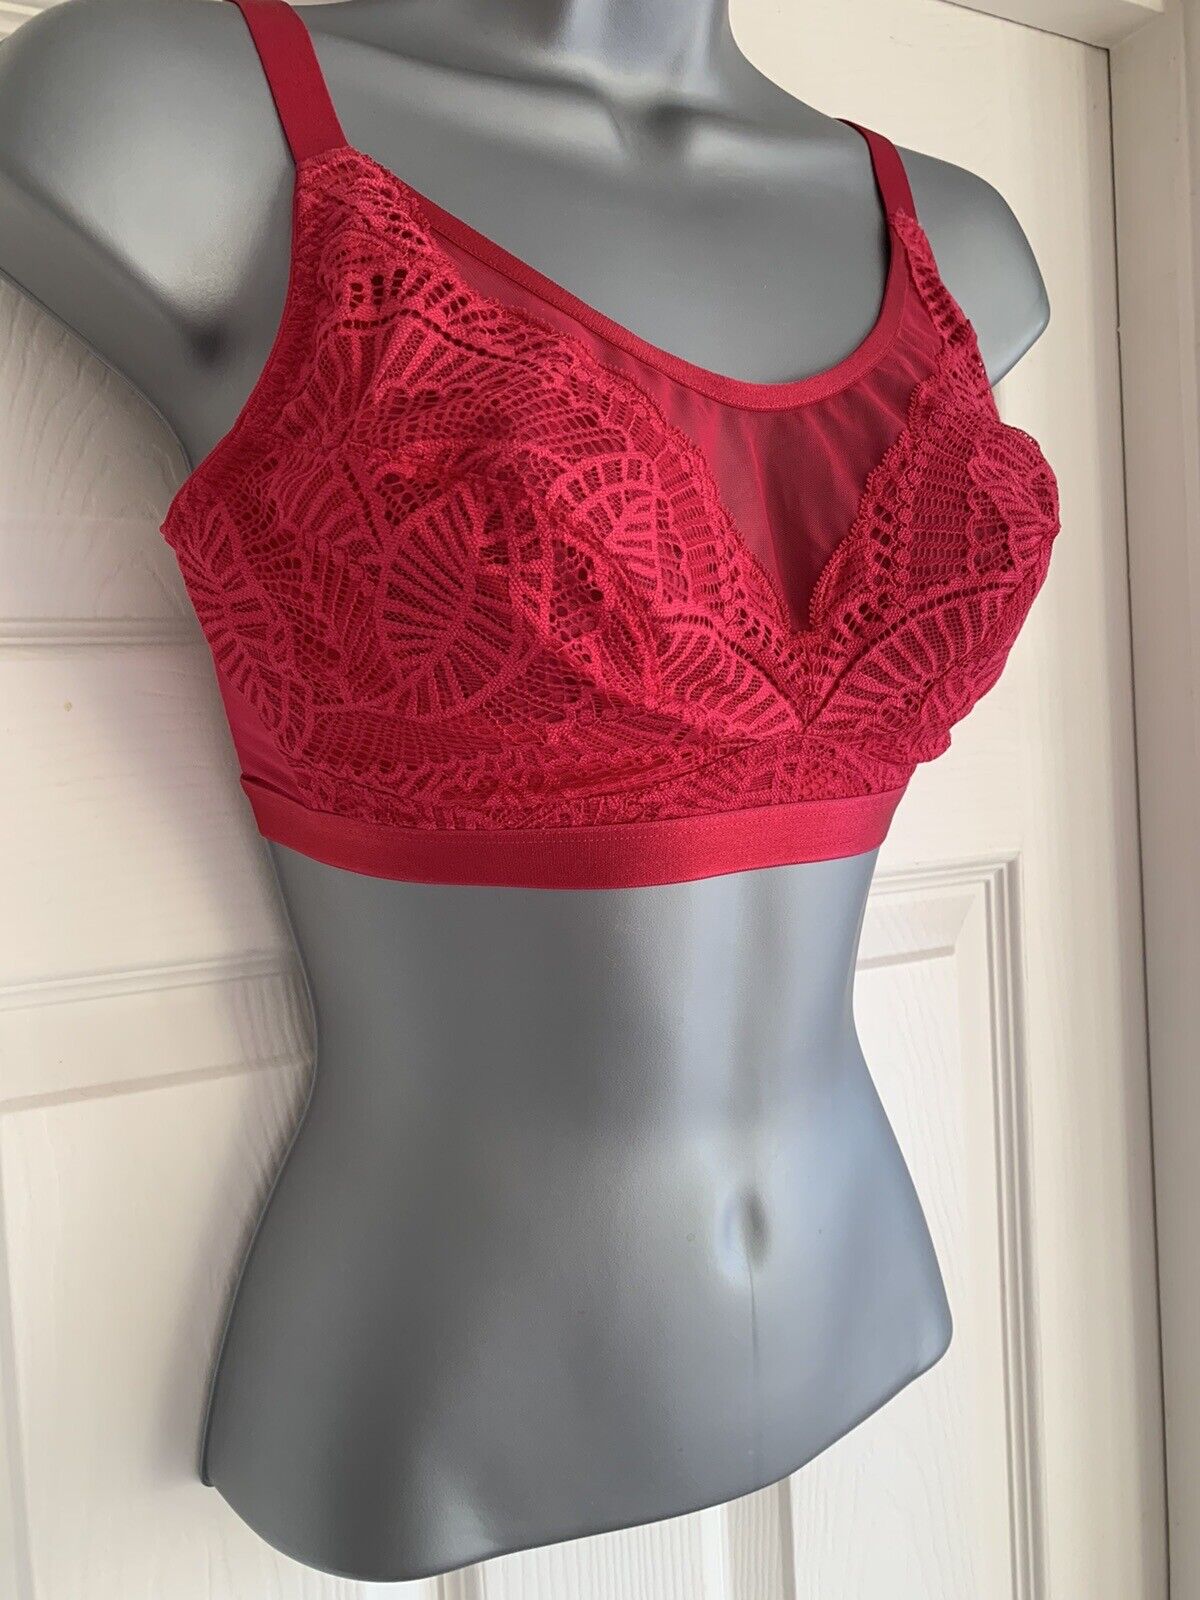 EX M*S Cherry Red Mesh Lace Non-Padded Bralette in Size 34DD